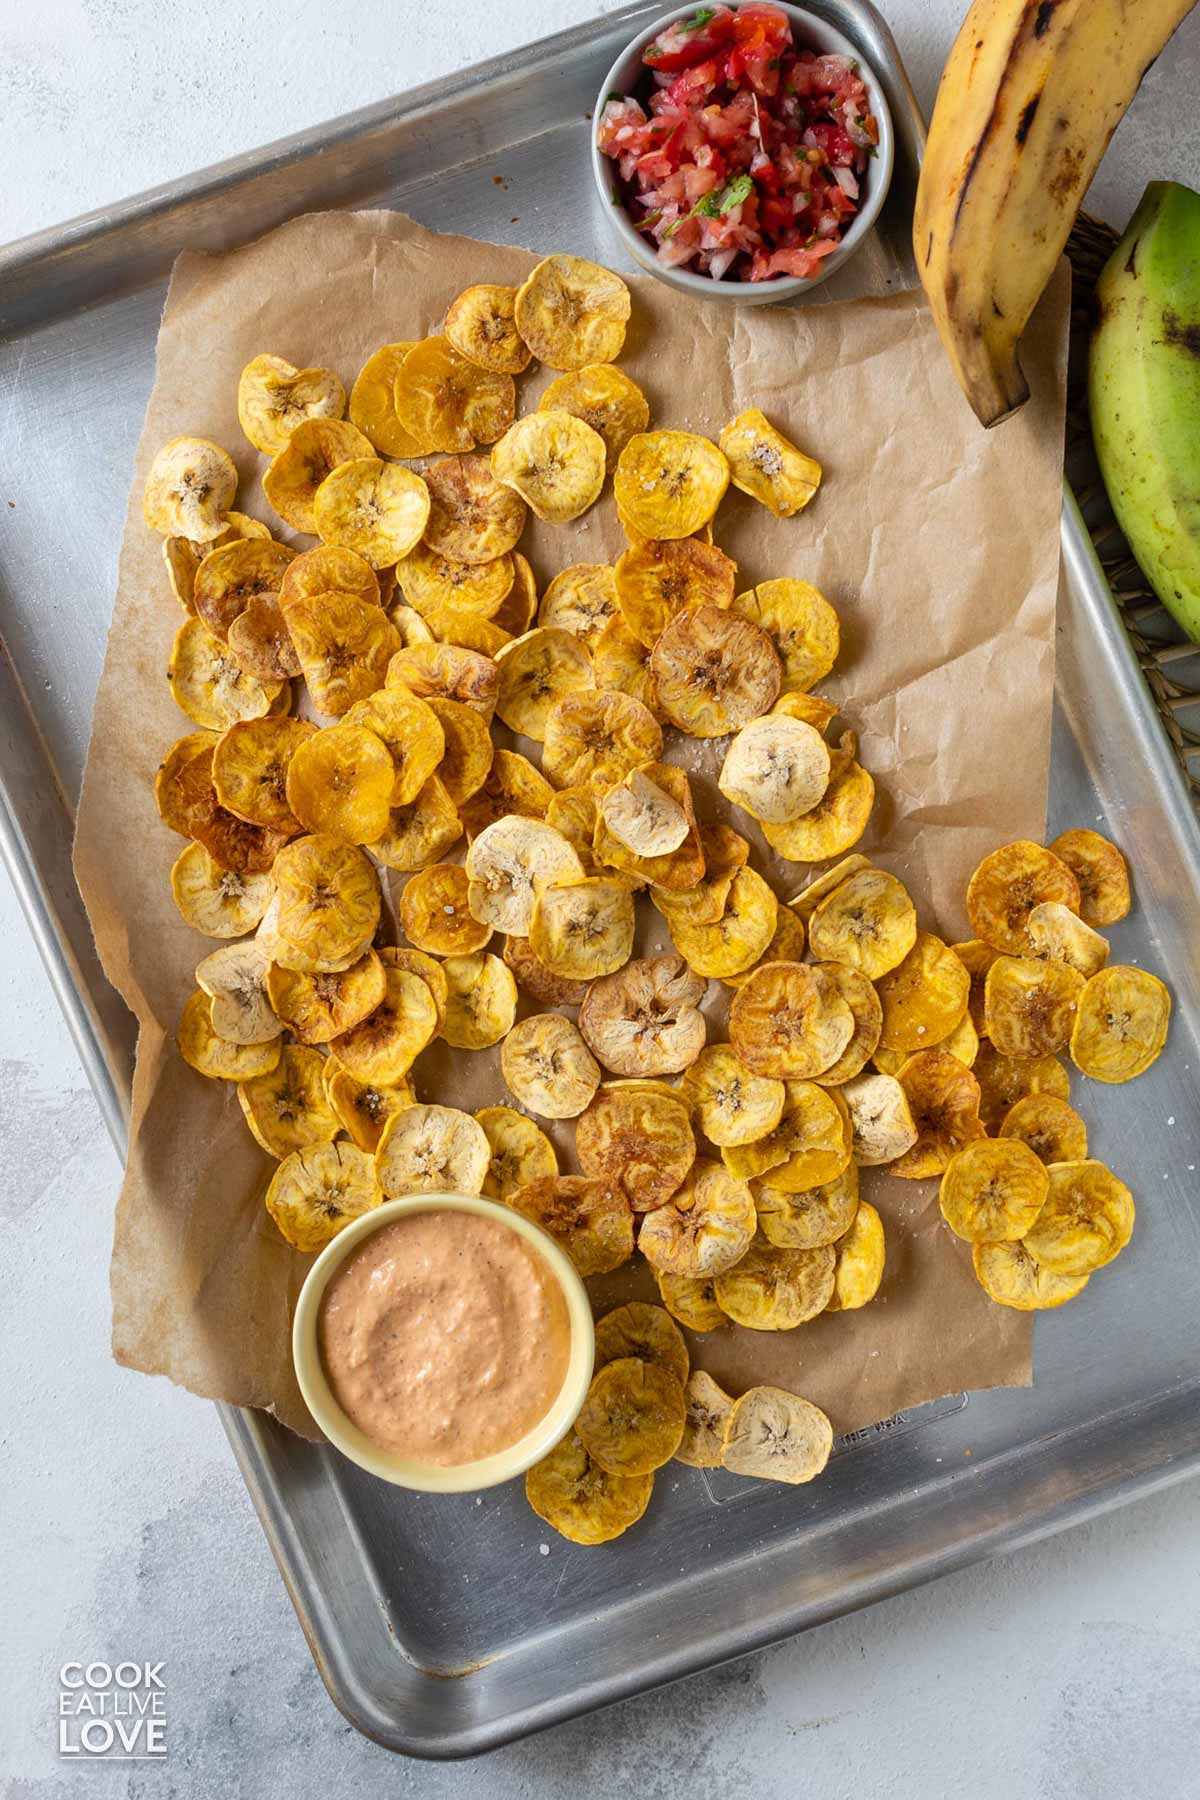 Baked plantain chips on a parchment paper and baking tray with sauces.